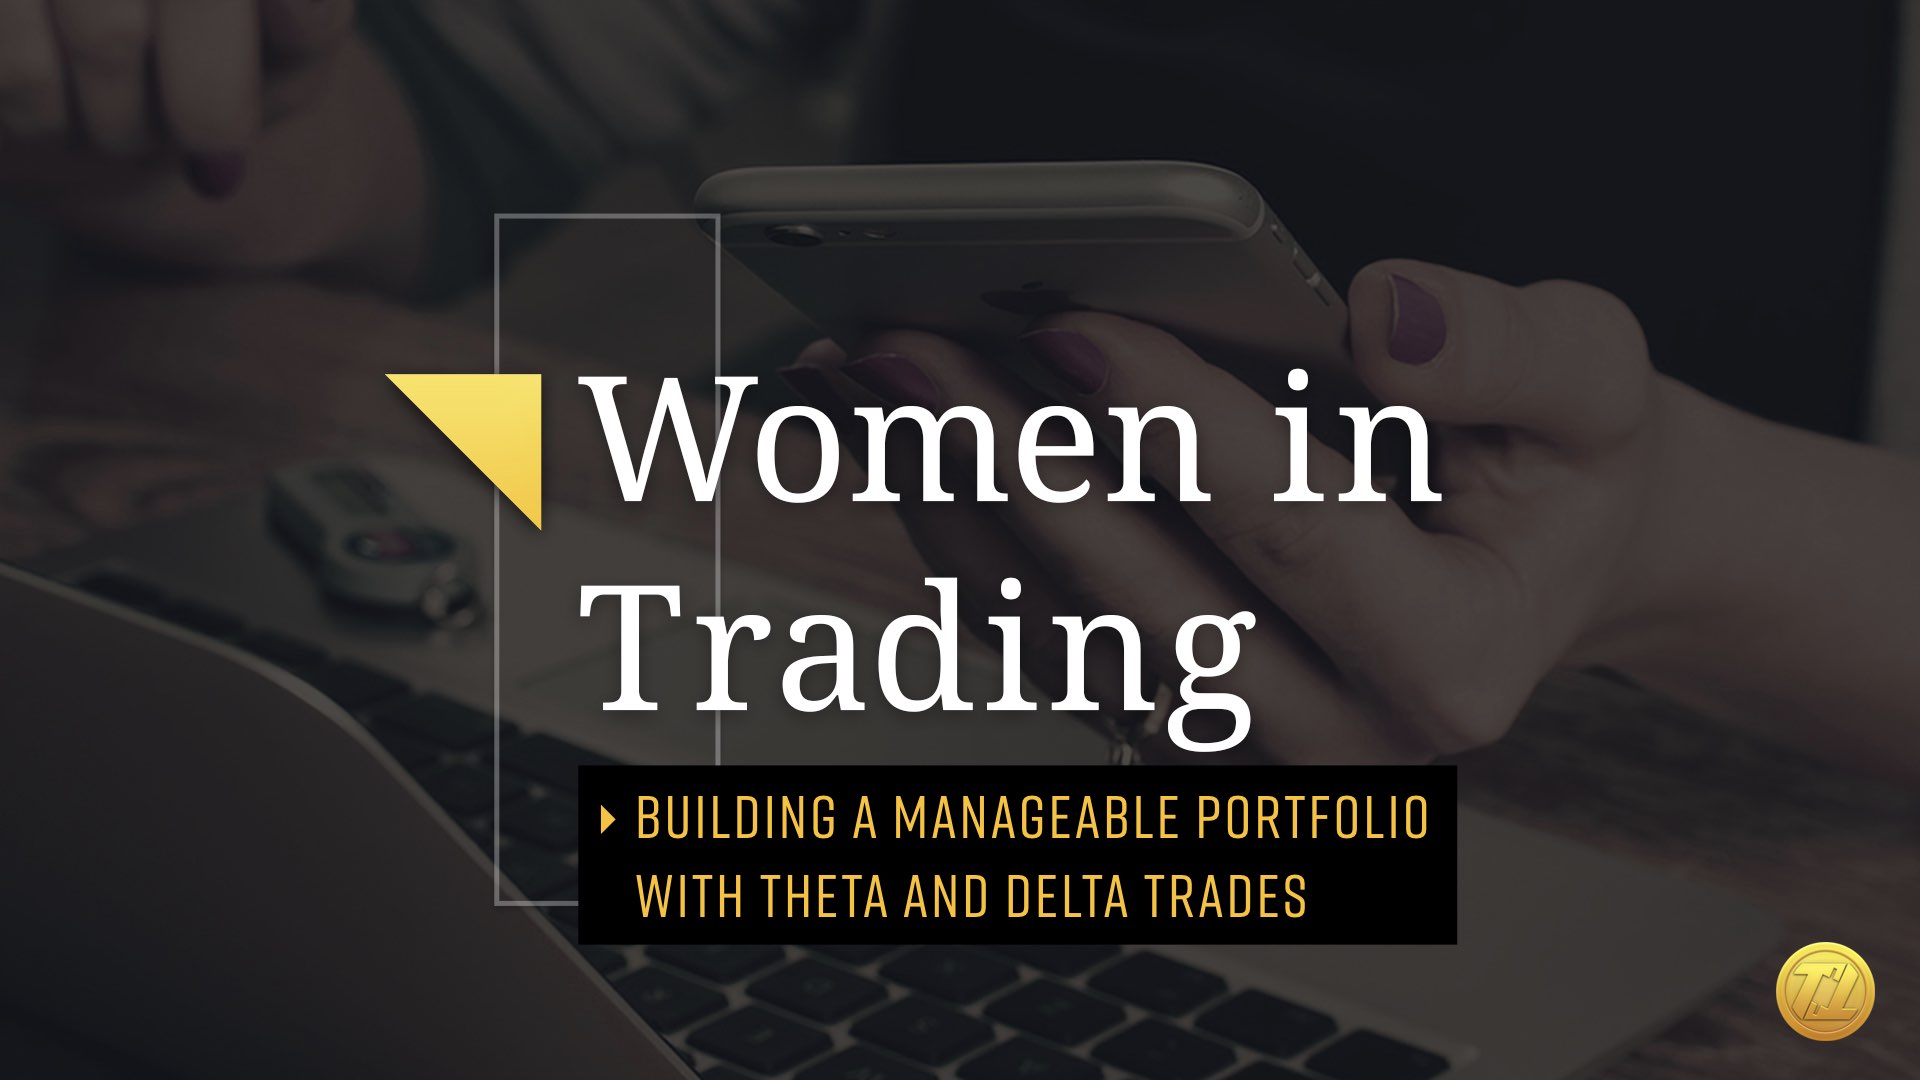 Women in Trading Mastermind Group January 2020 Meeting: Building a manageable portfolio with Theta and Delta trades